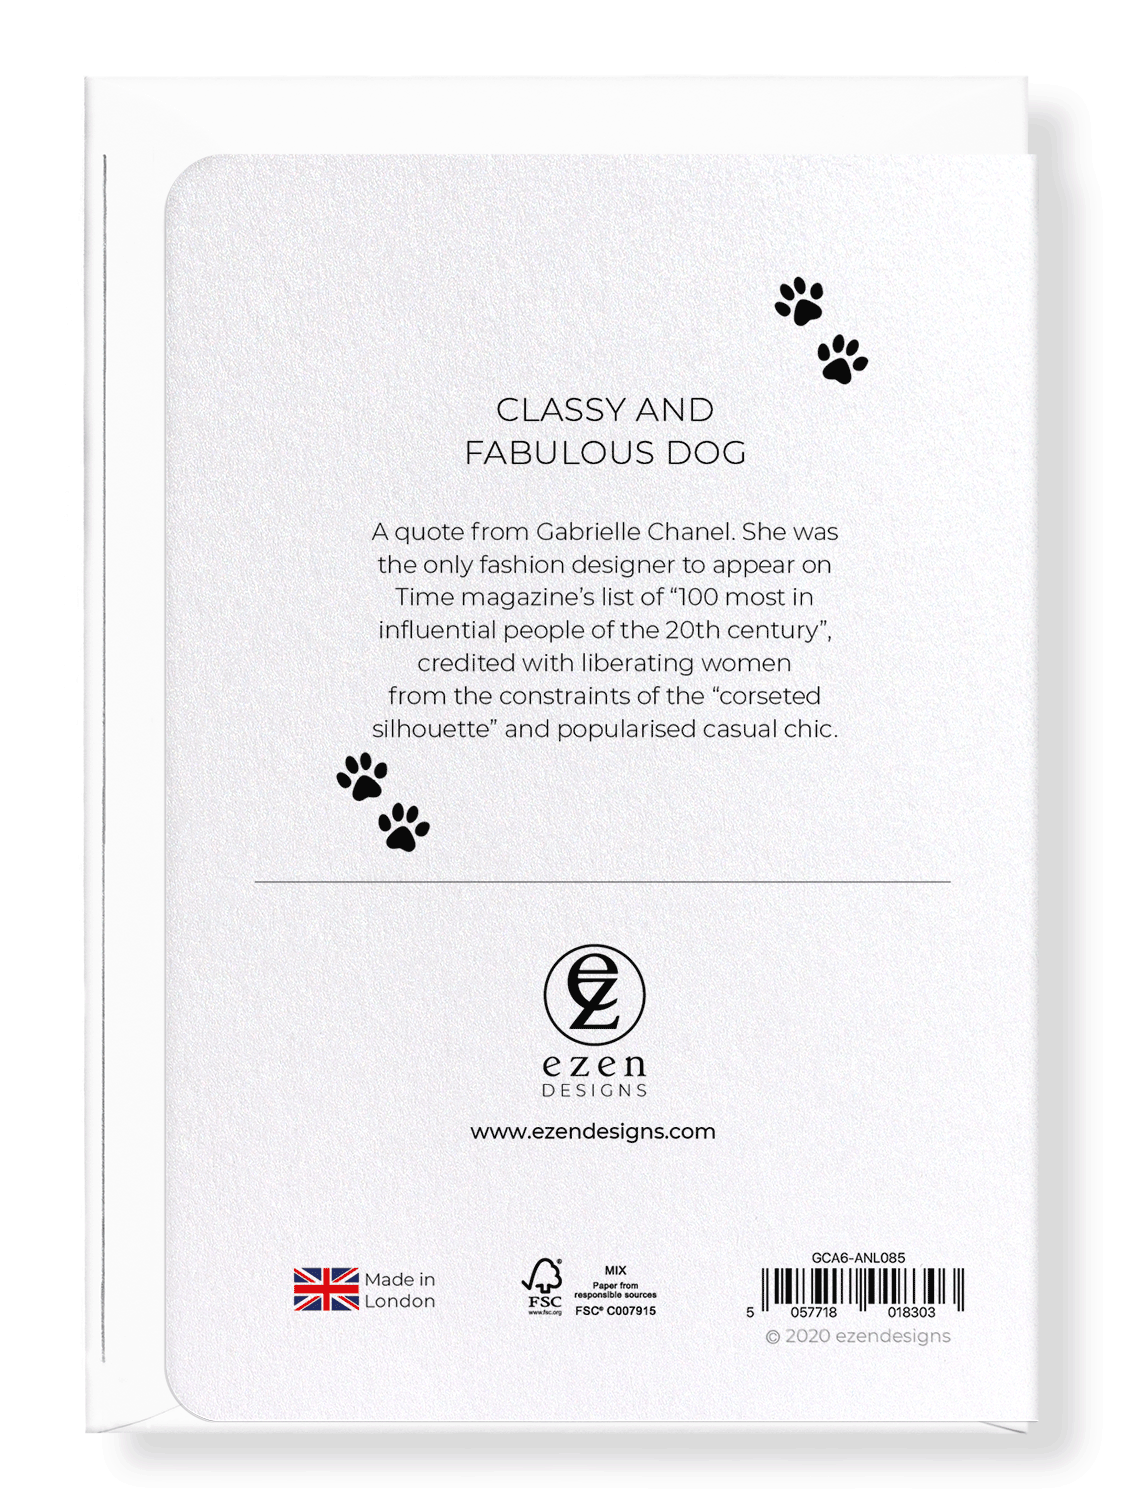 Ezen Designs - Classy and fabulous dog - Greeting Card - Back